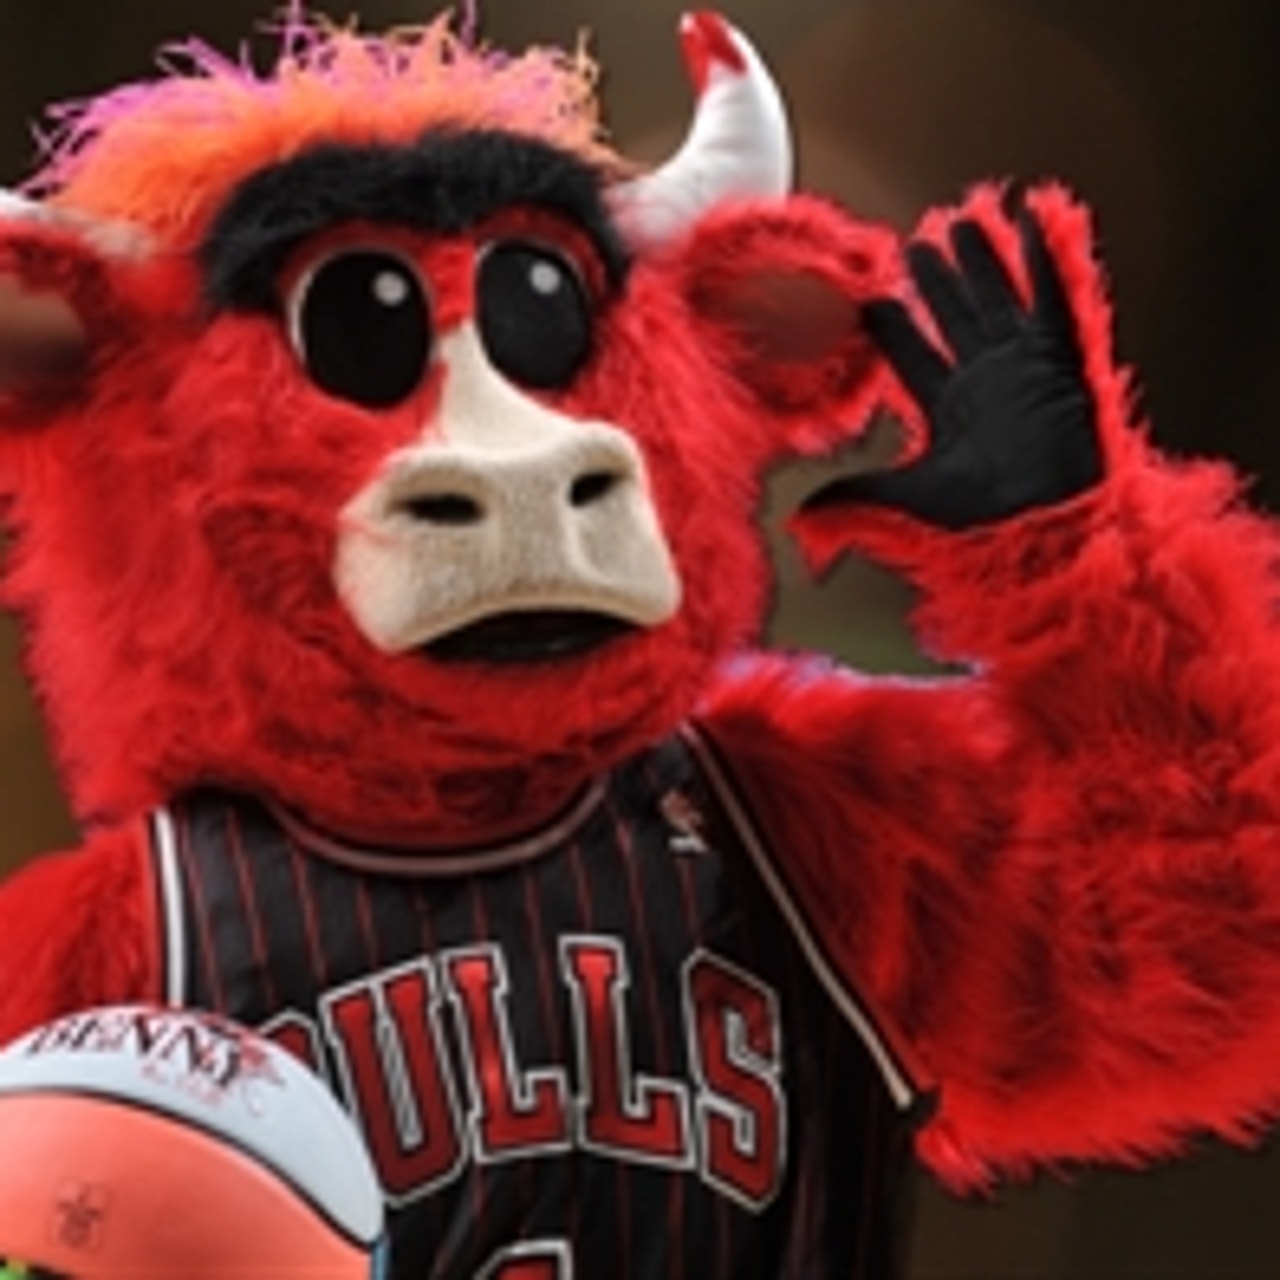 An NBA mascot made the best shot of opening night thanks to lucky bounce